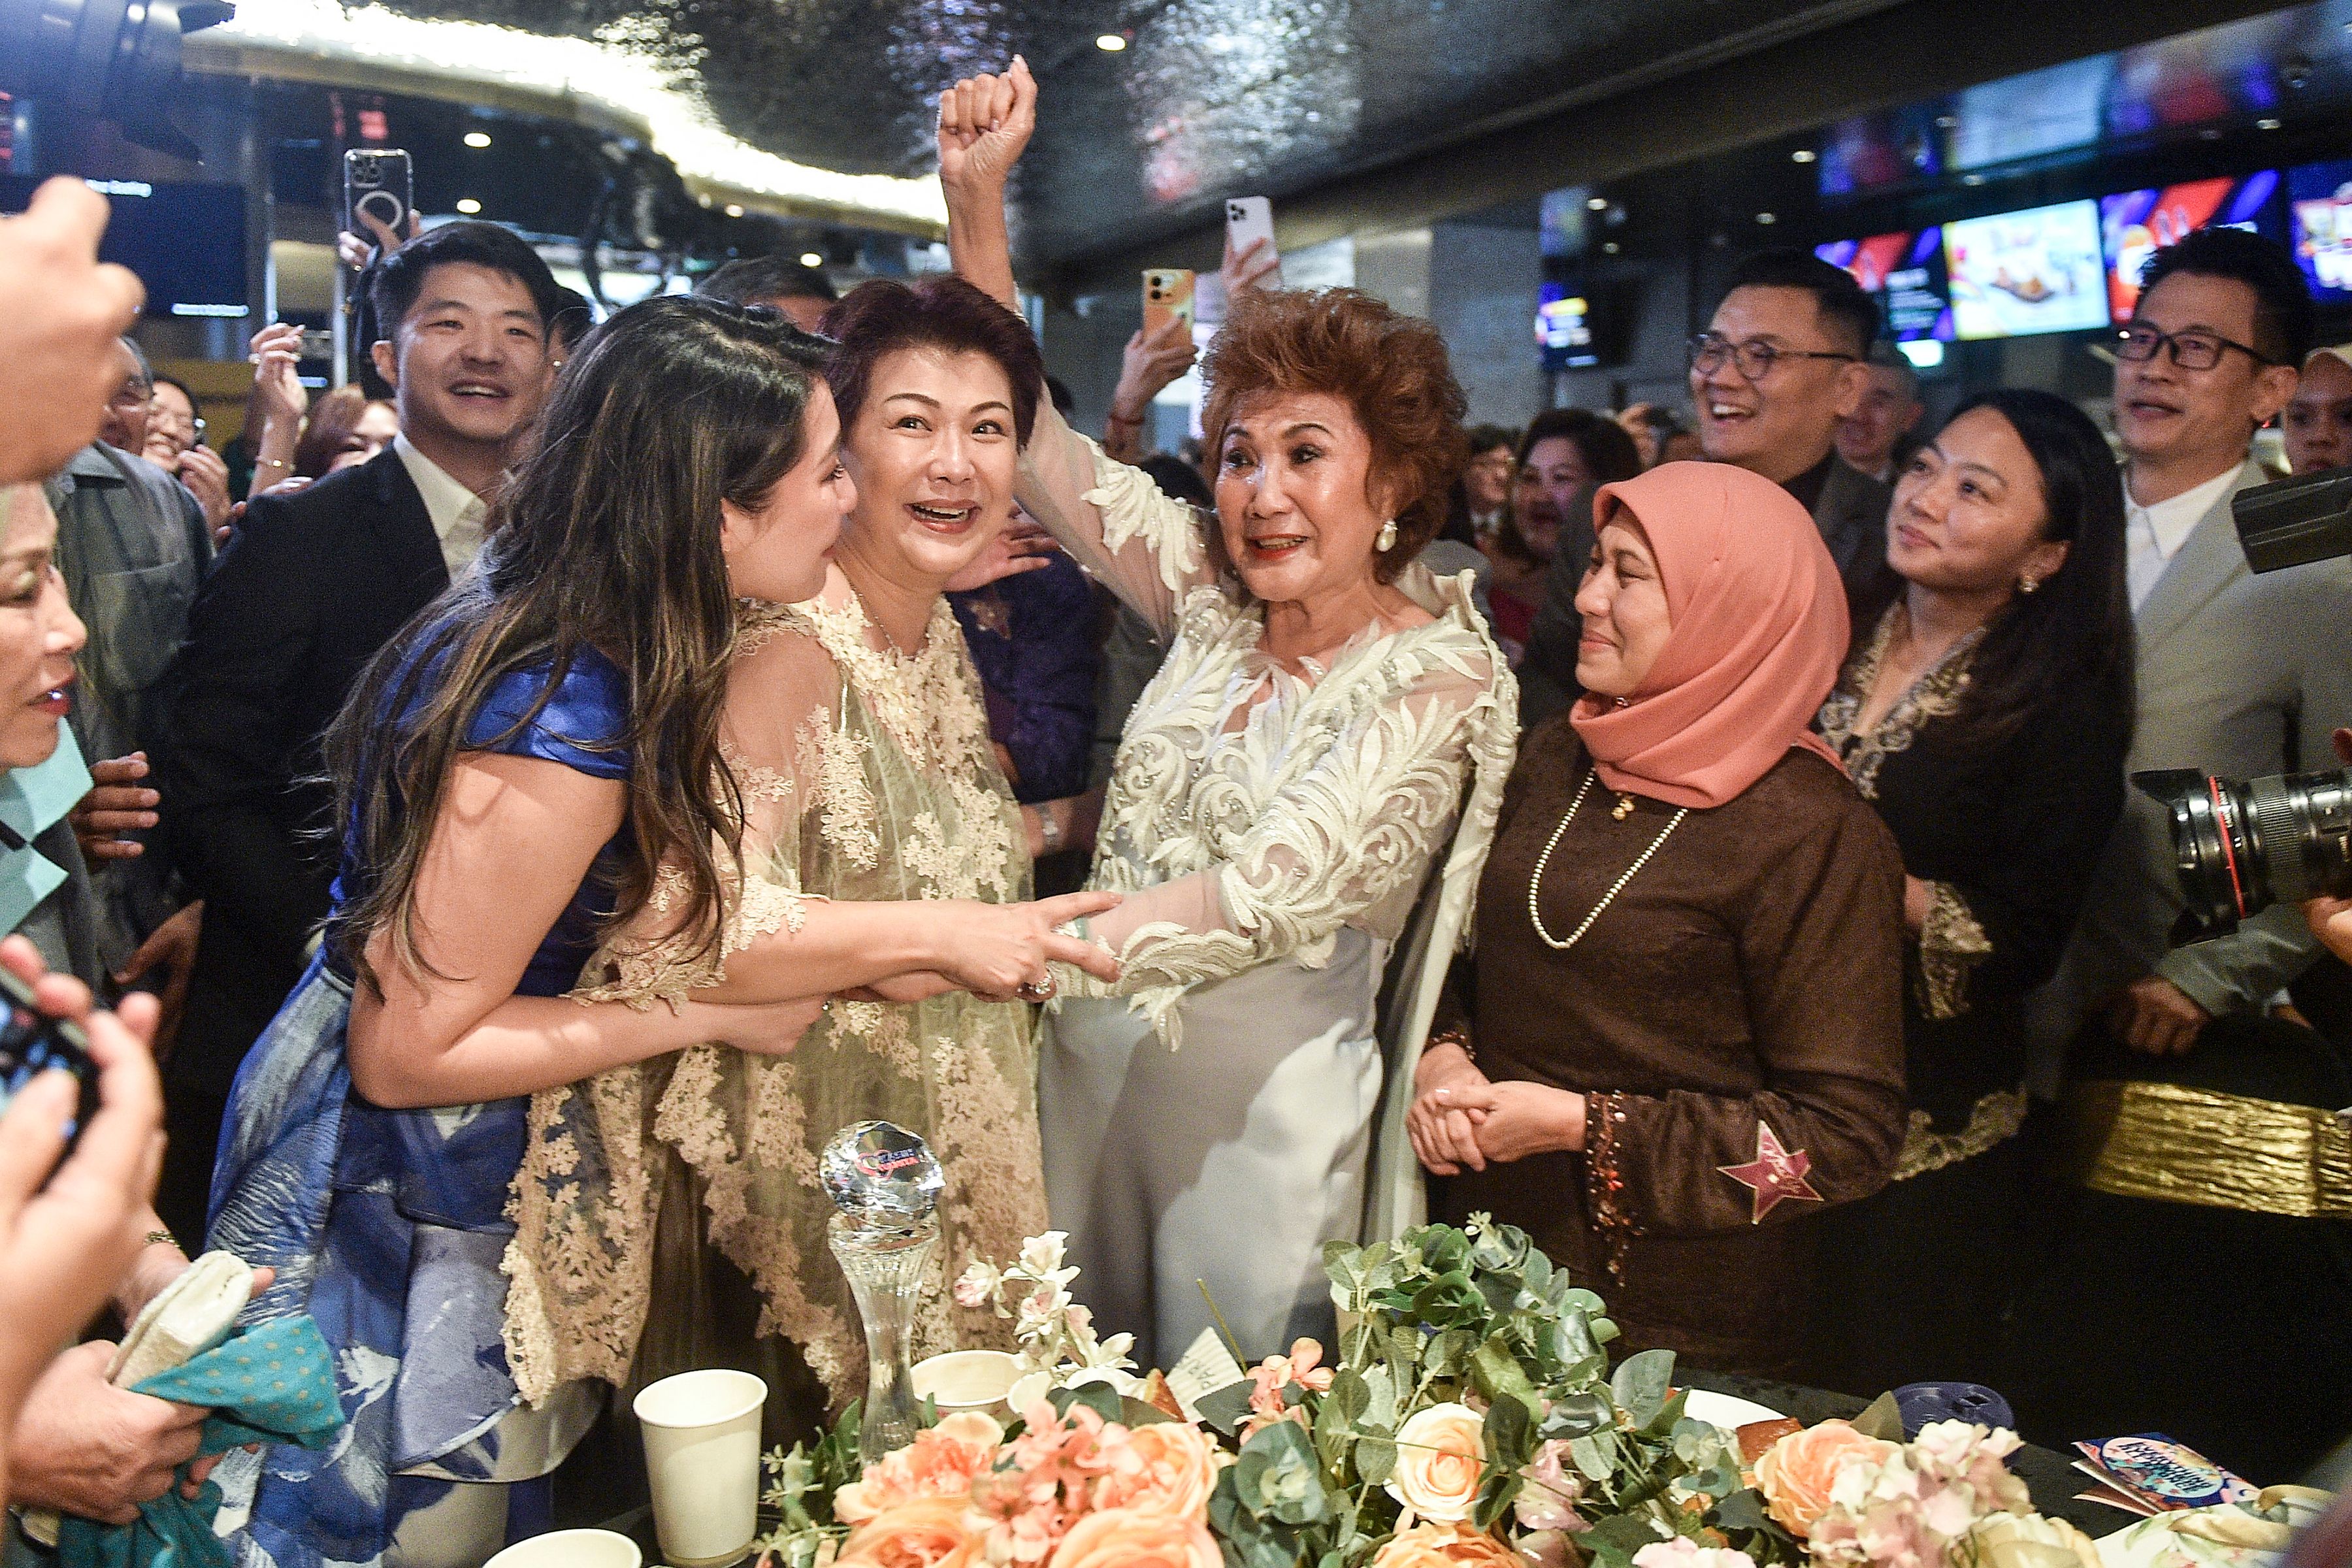 Janet Yeoh (centre R), mother of actress Michelle Yeoh, is pictured as she celebrates after her daughter won the award for Best Actress in a Leading Role at the 95th Academy Awards in Los Angeles, at an event in Kuala Lumpur on March 13, 2023 | Source: Getty Images